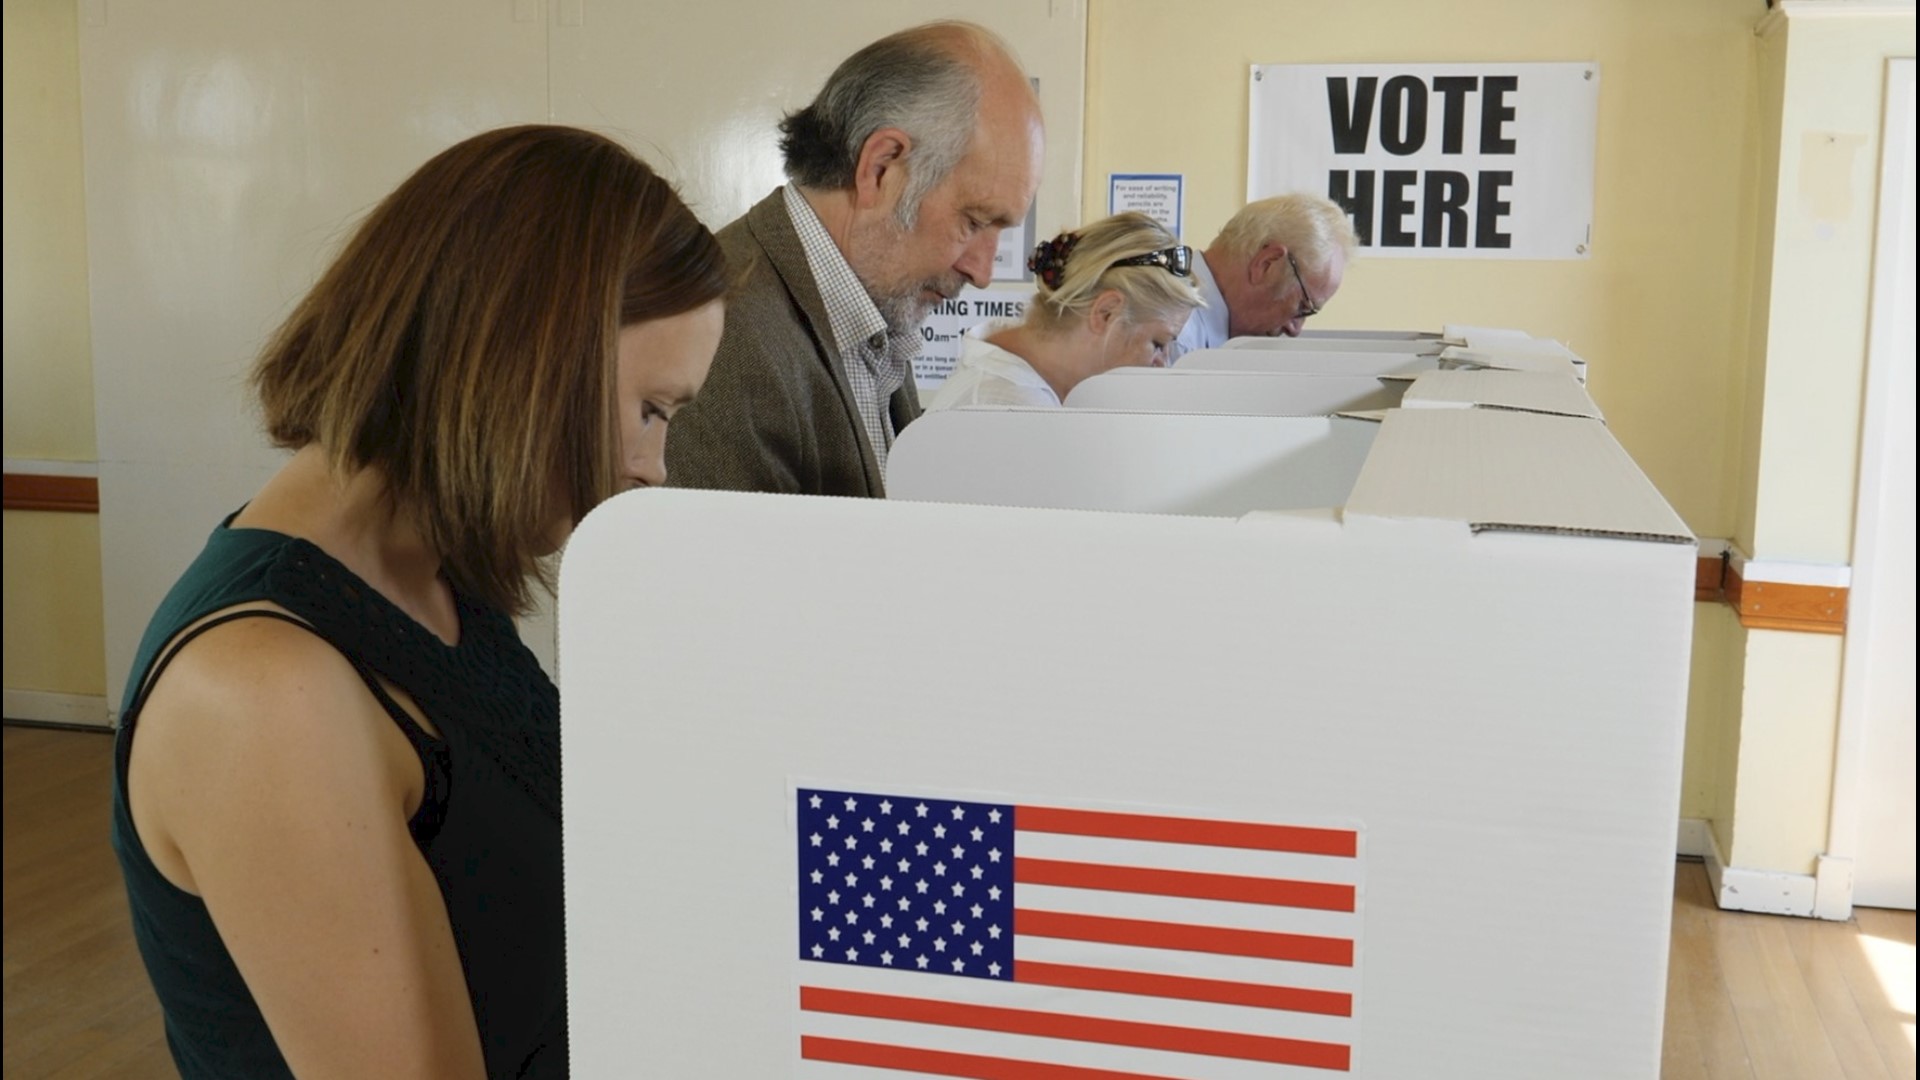 Democrats are expressing more of a safety concern with in-person voting during the pandemic. Veuer's Justin Kircher has more.